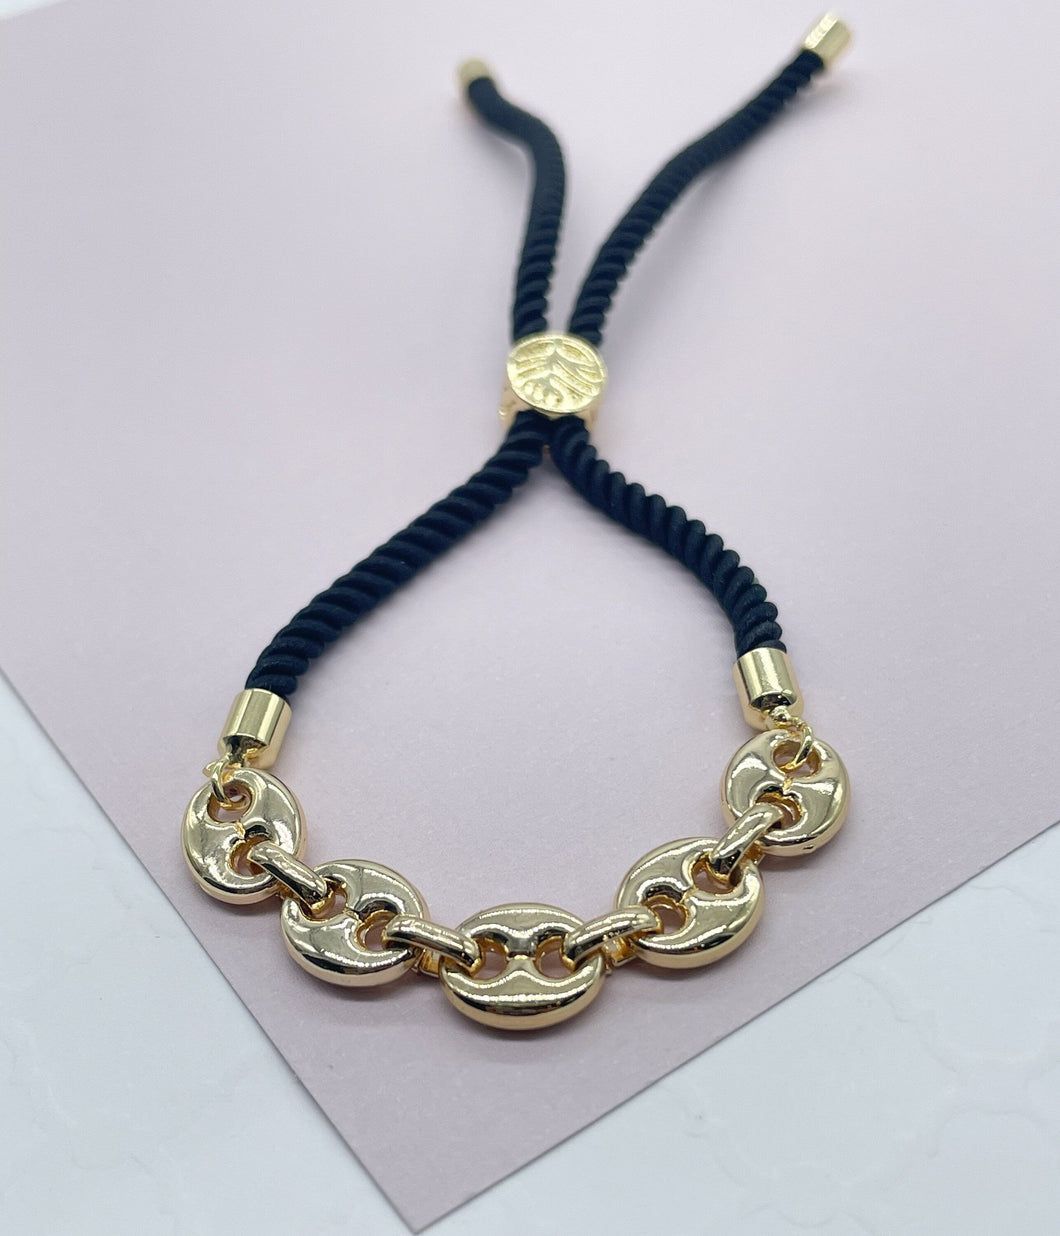 18k Gold Filled Twisted Fabric Bracelet With Mariner Chain in The Center in Winter Colors